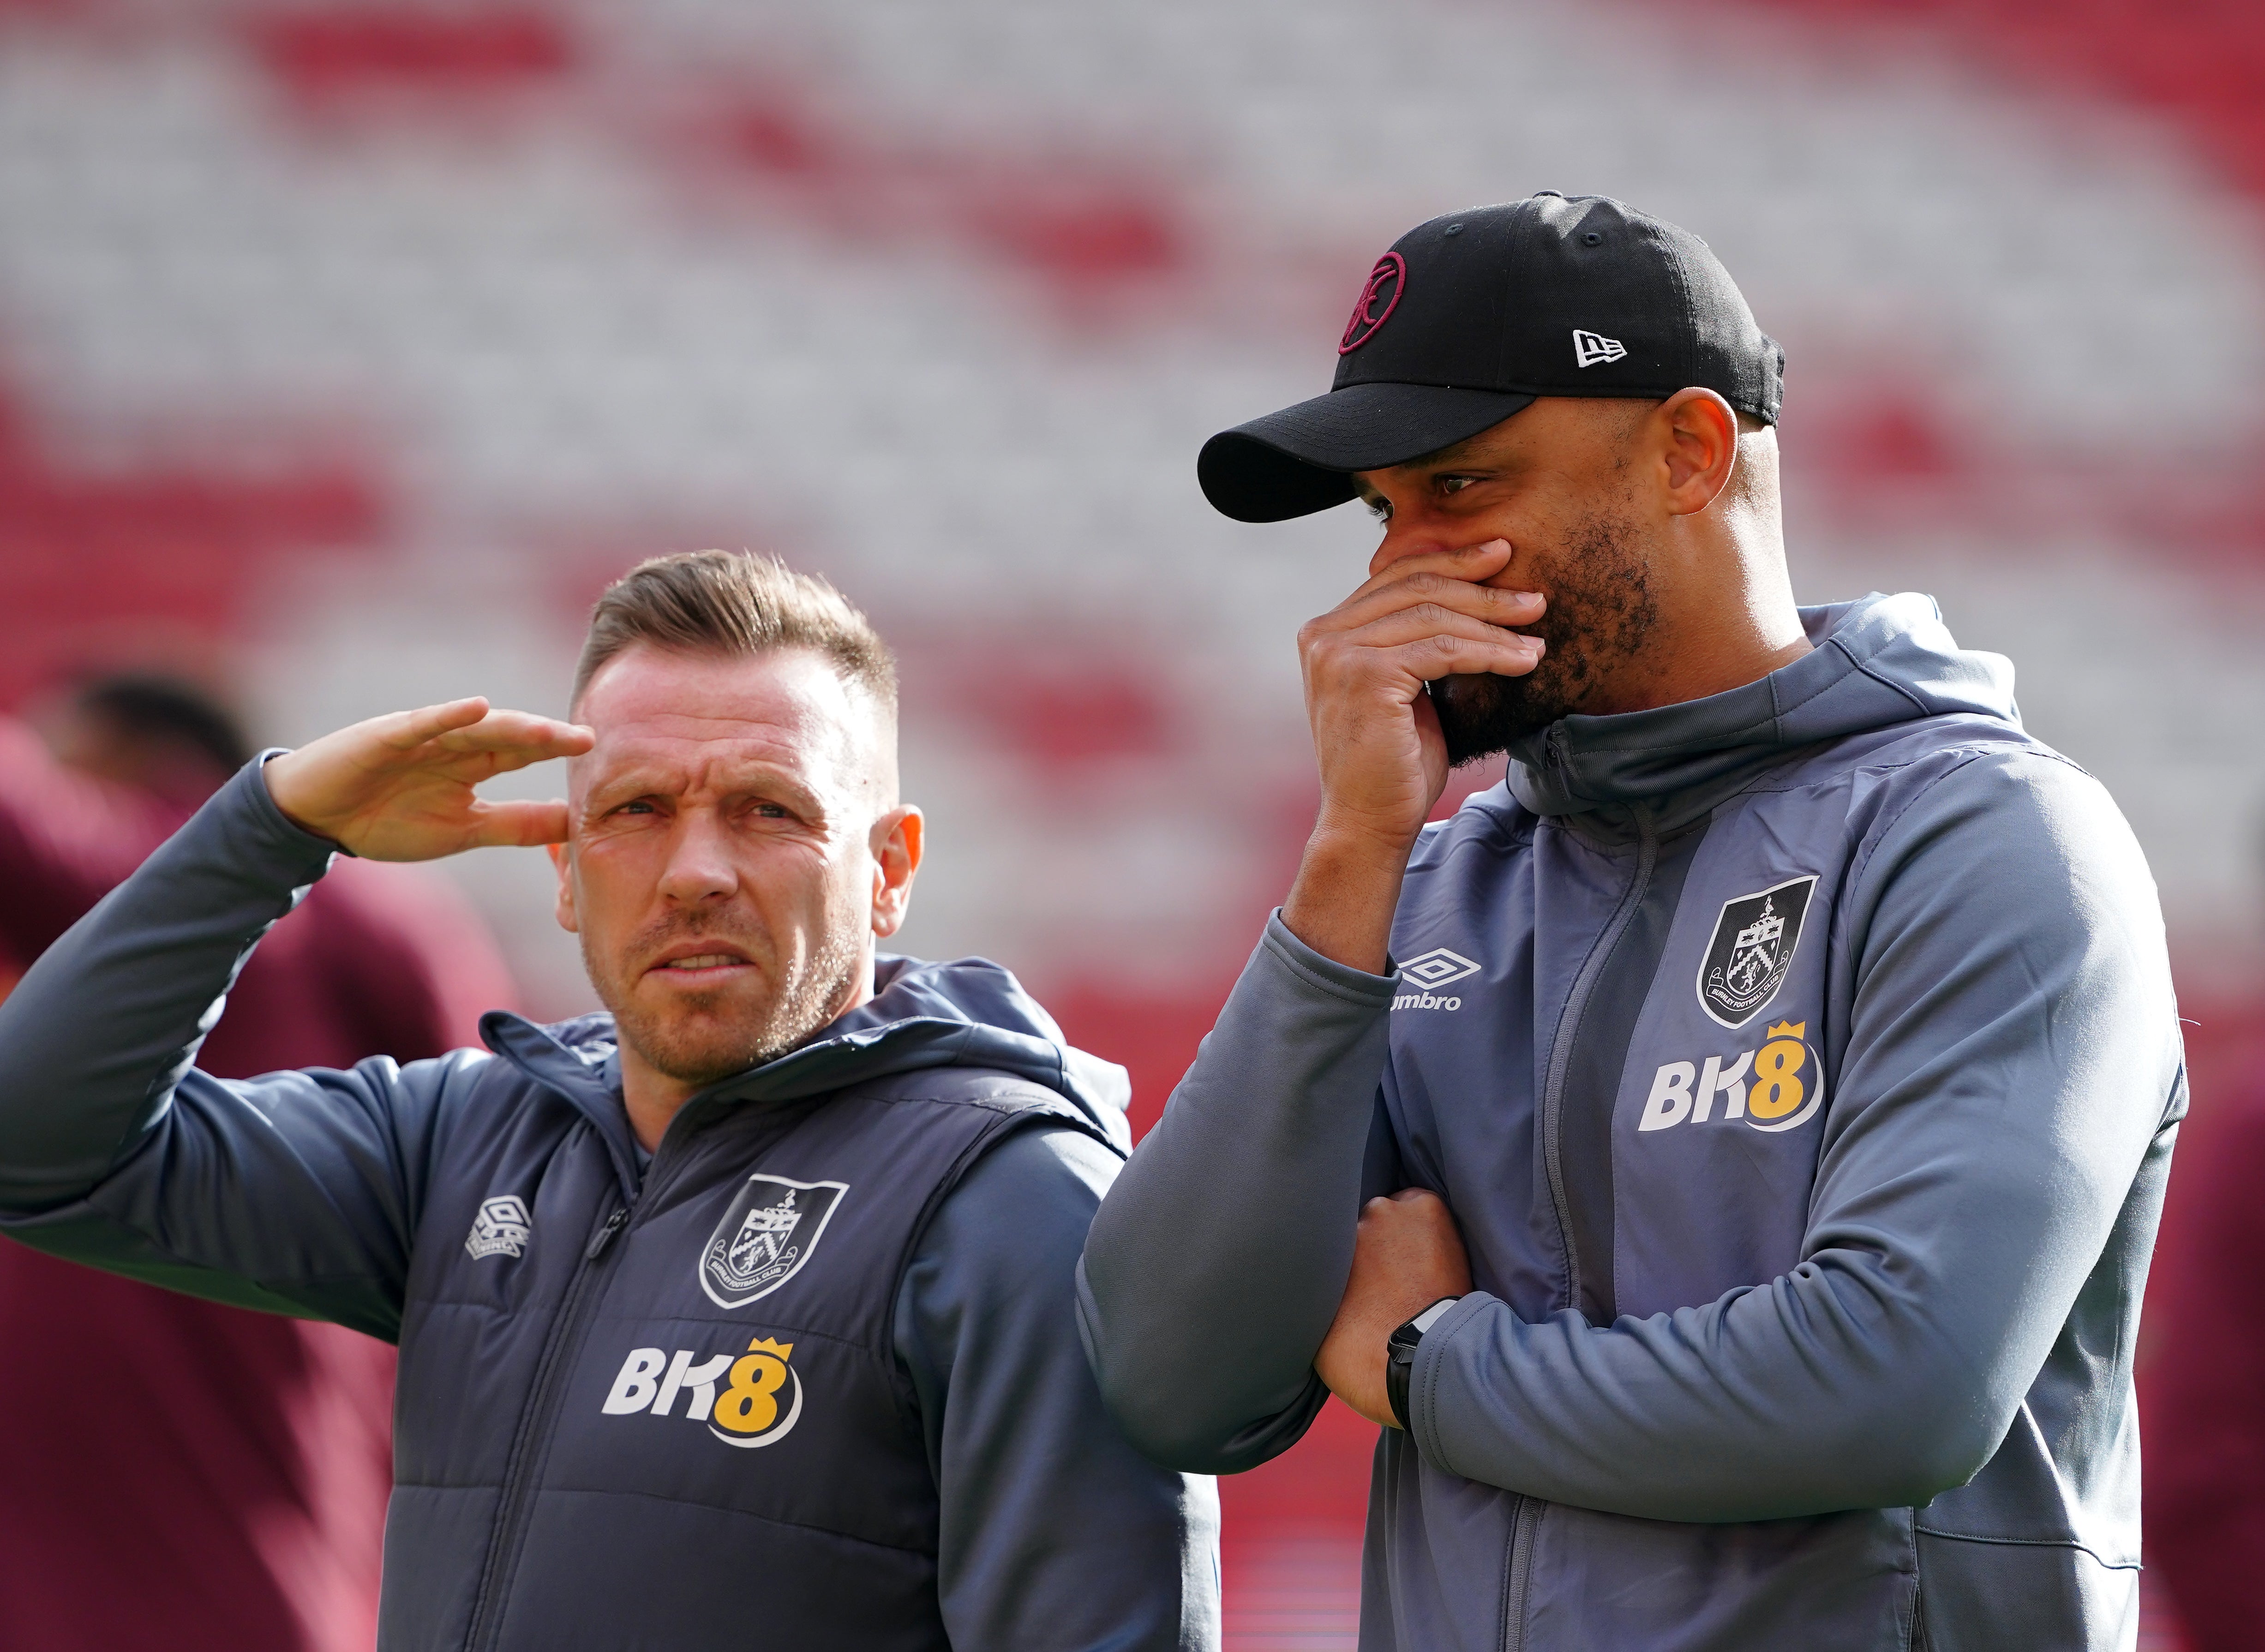 Craig Bellamy (left) gained coaching experience alongside Vincent Kompany at Burnley and Anderlecht (Peter Byrne/PA)